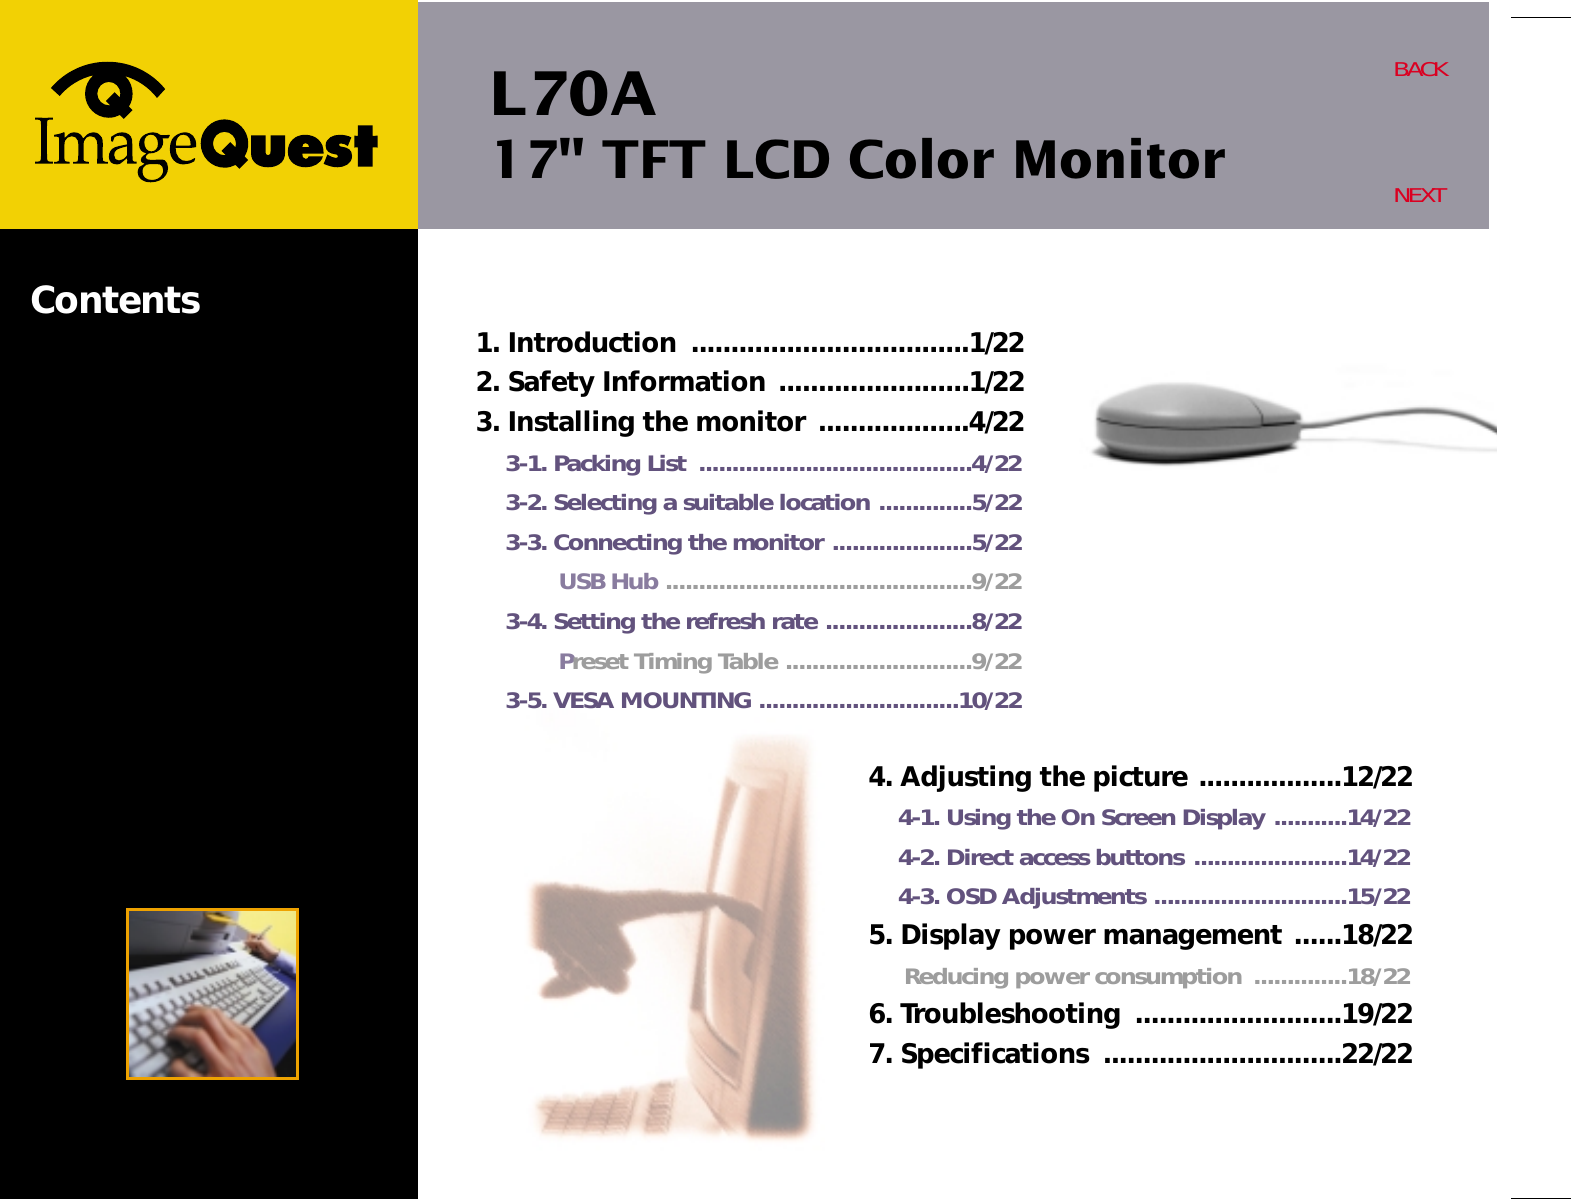 L70A17&quot; TFT LCD Color MonitorBACKNEXTContents4. Adjusting the picture ..................12/224-1. Using the On Screen Display ...........14/224-2. Direct access buttons .......................14/224-3. OSD Adjustments .............................15/225. Display power management ......18/22Reducing power consumption  ..............18/226. Troubleshooting  ..........................19/227. Specifications  ..............................22/221. Introduction  ...................................1/222. Safety Information ........................1/223. Installing the monitor ...................4/223-1. Packing List  .........................................4/223-2. Selecting a suitable location ..............5/223-3. Connecting the monitor .....................5/22USB Hub ..............................................9/223-4. Setting the refresh rate ......................8/22Preset Timing Table ............................9/223-5. VESA MOUNTING ..............................10/22